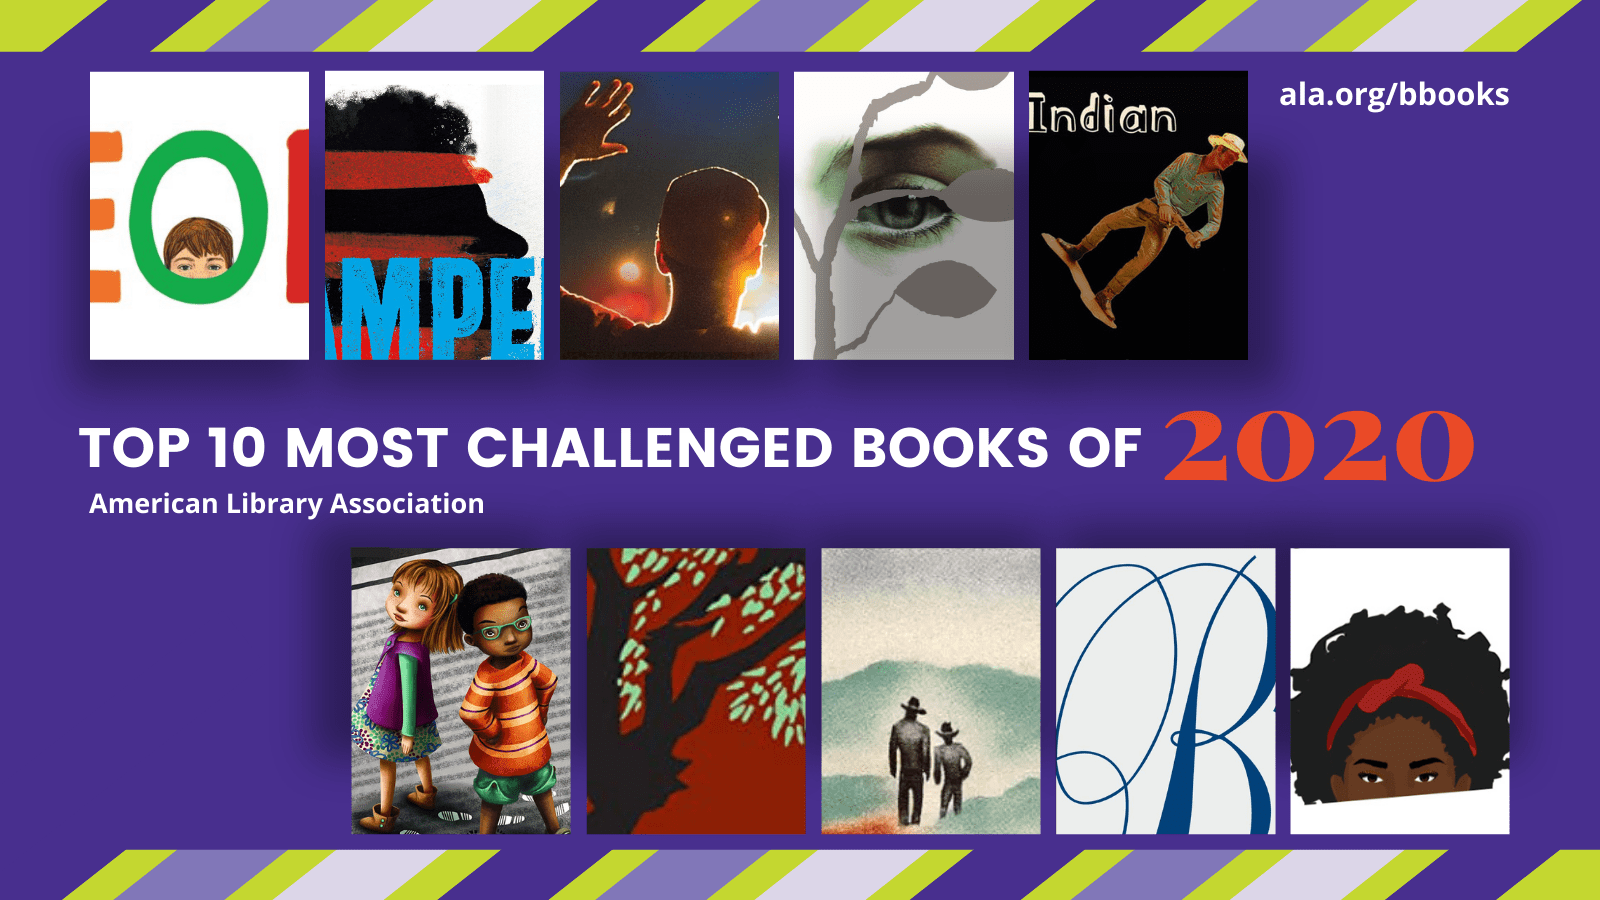 American Library Association infographic - Top 10 Most Challenged Books of 2020